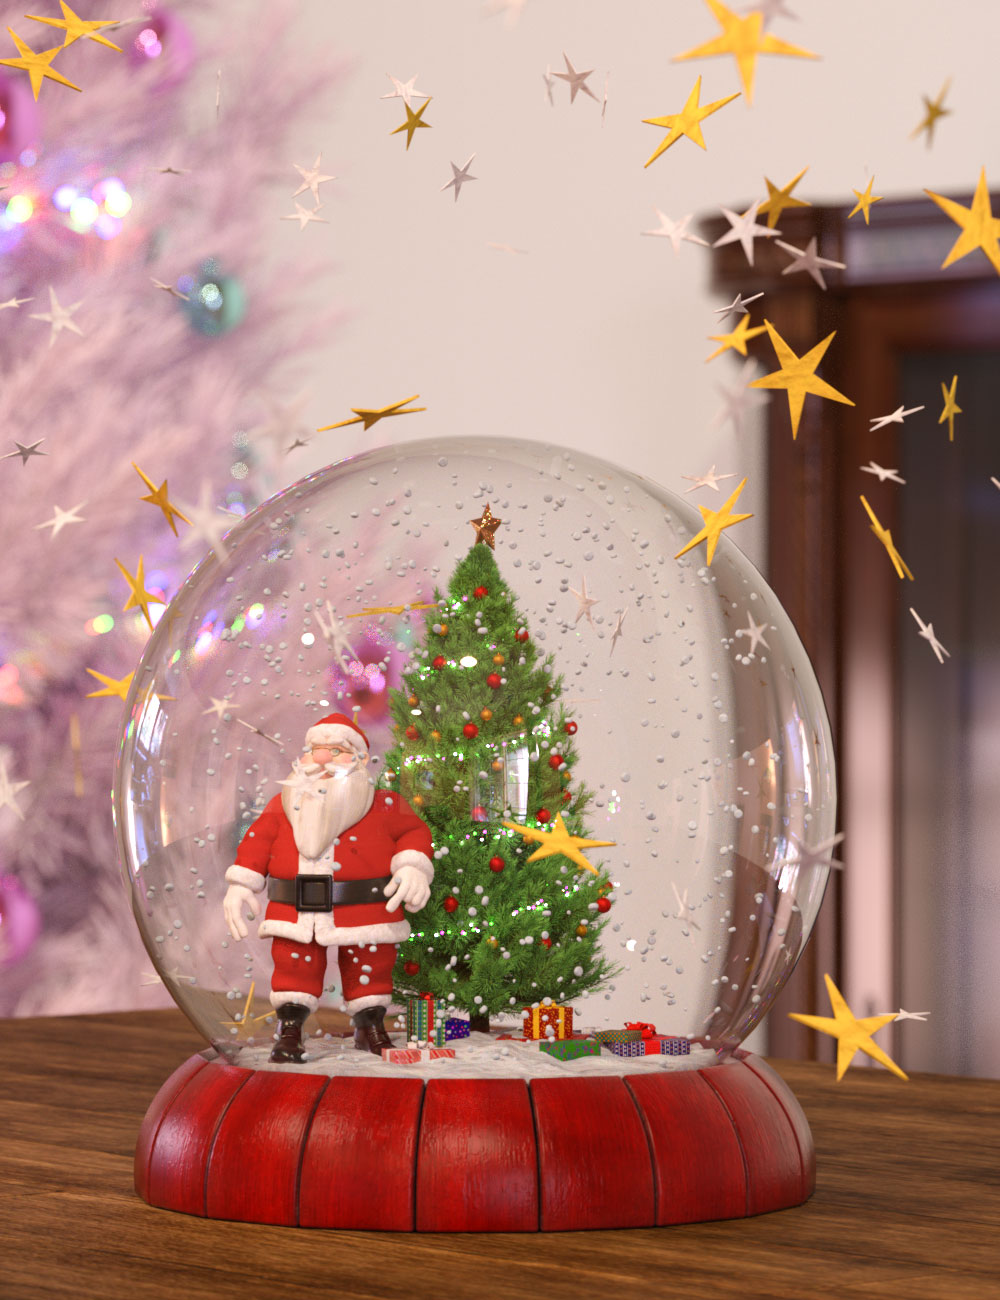 Snow Globe Your World by: V3Digitimes, 3D Models by Daz 3D